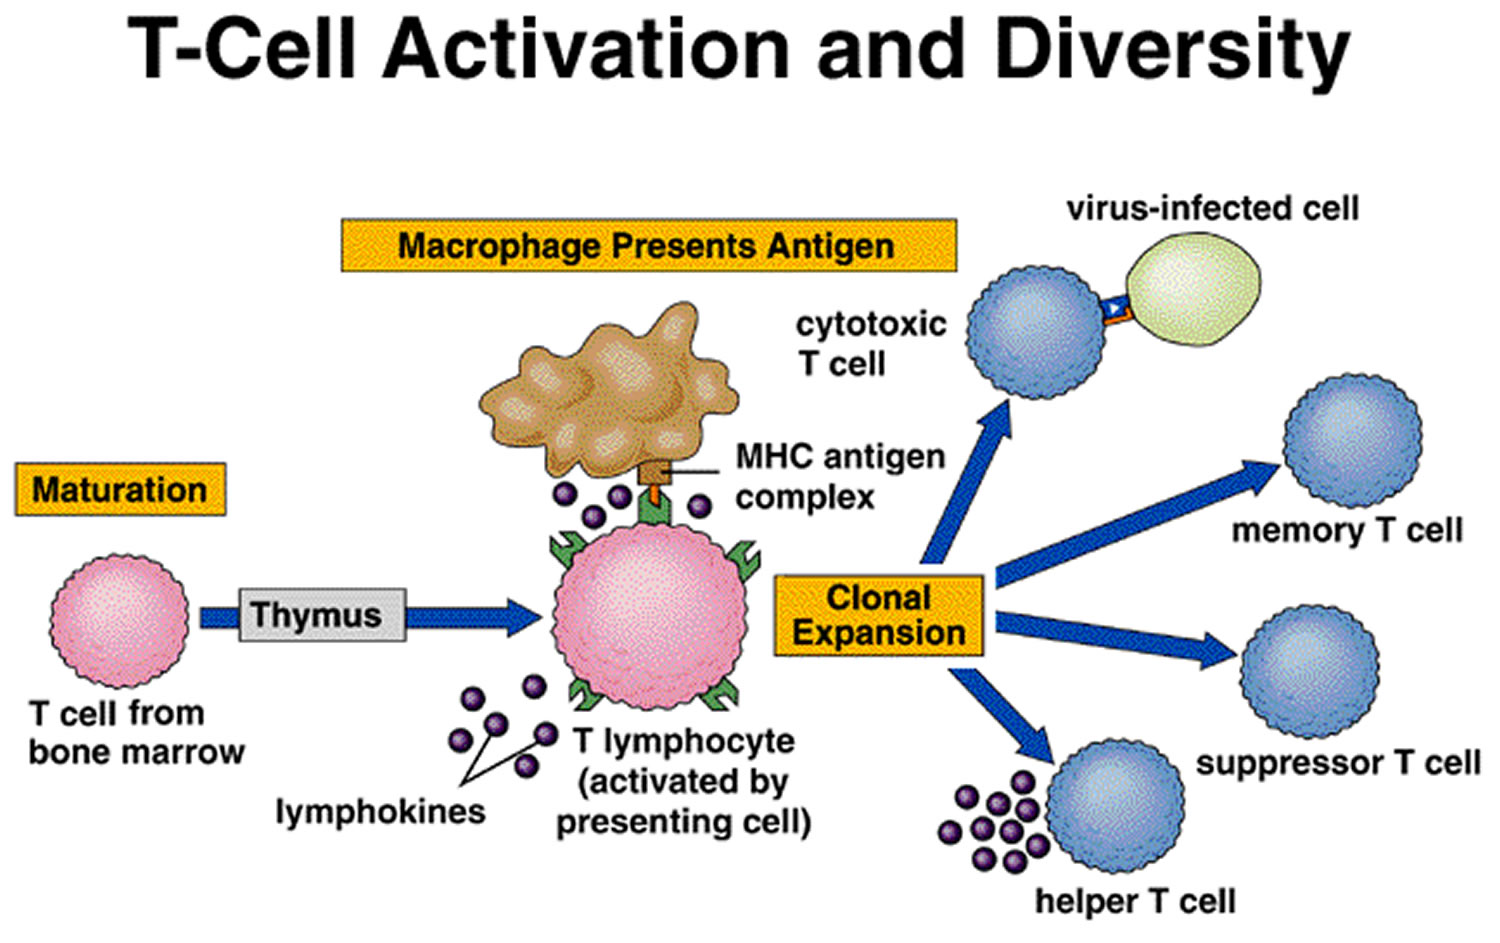 t-cell activation